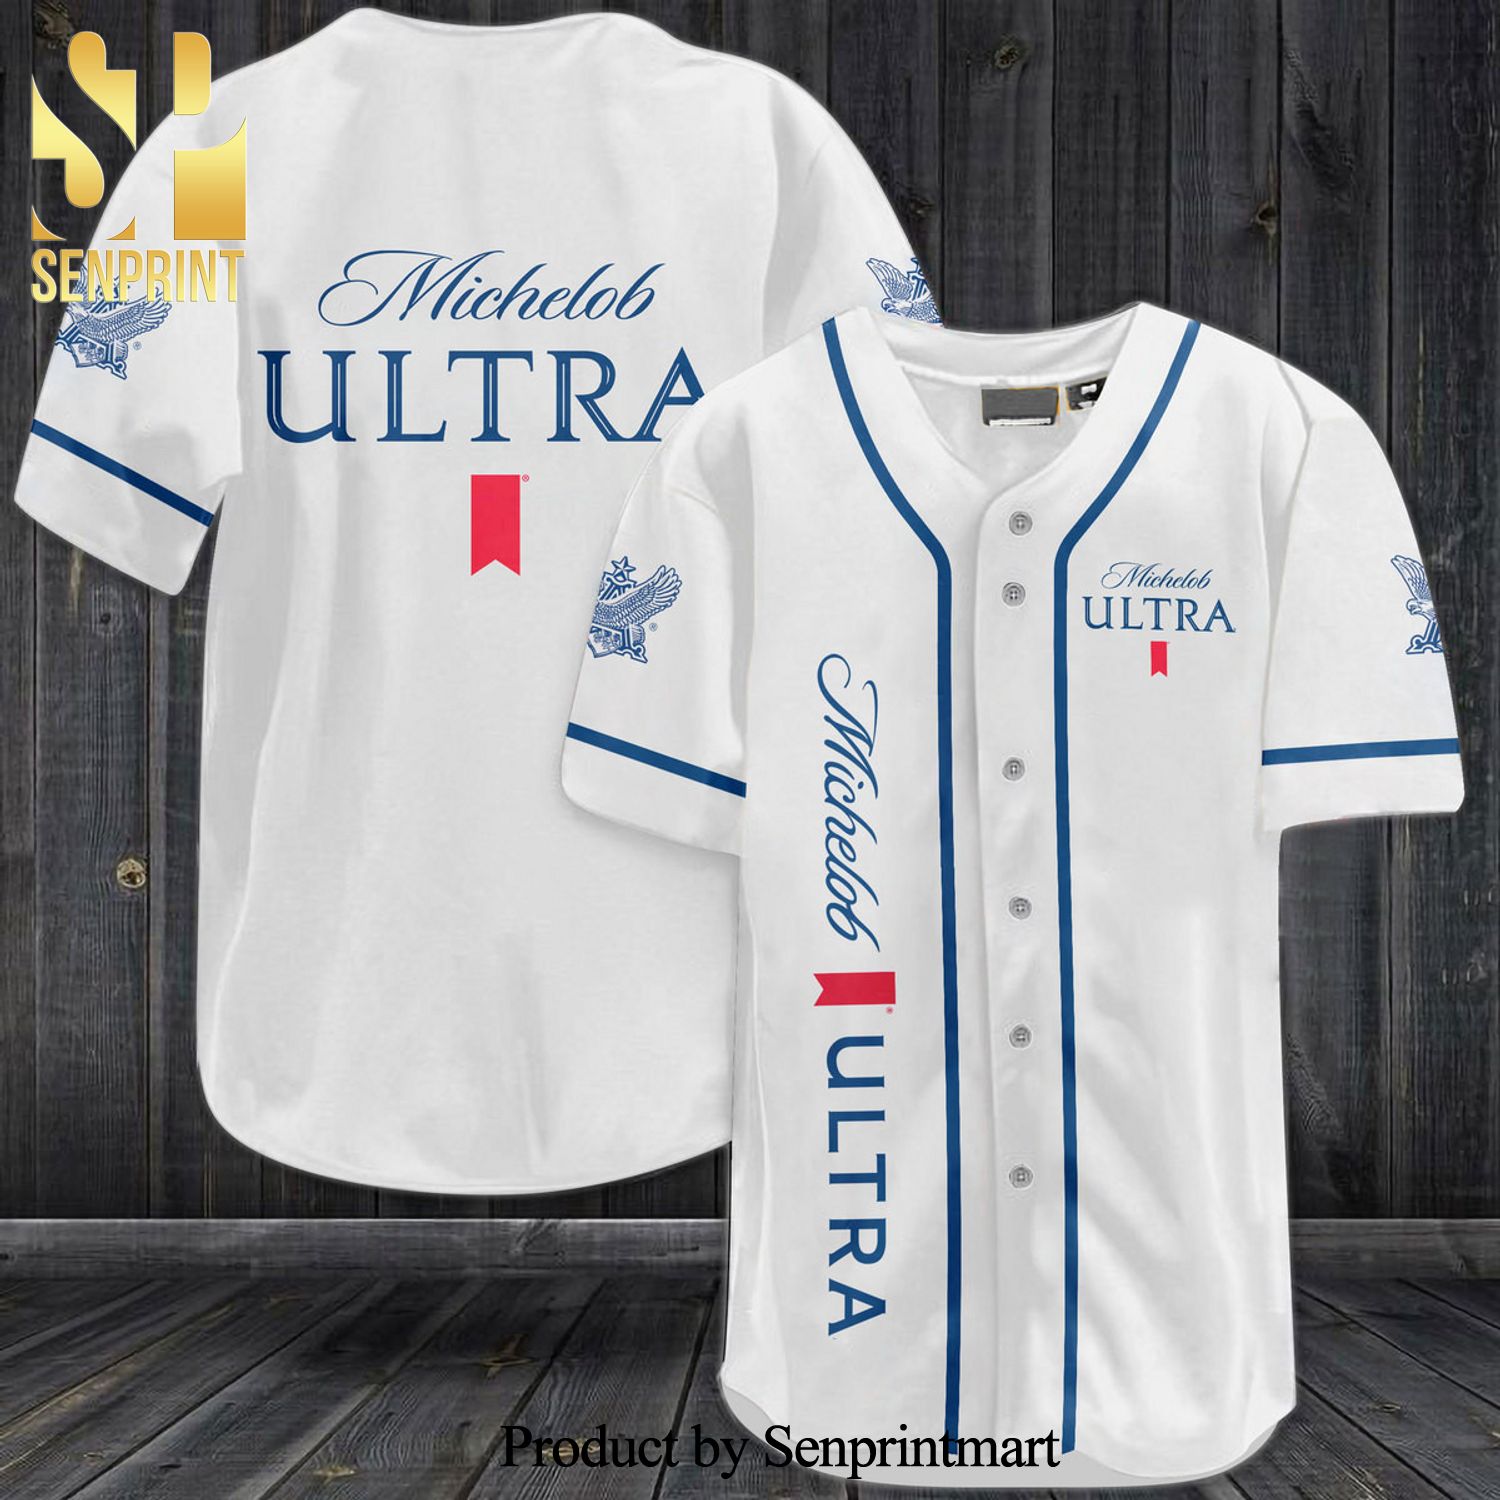 Michelob Ultra All Over Print Baseball Jersey - White